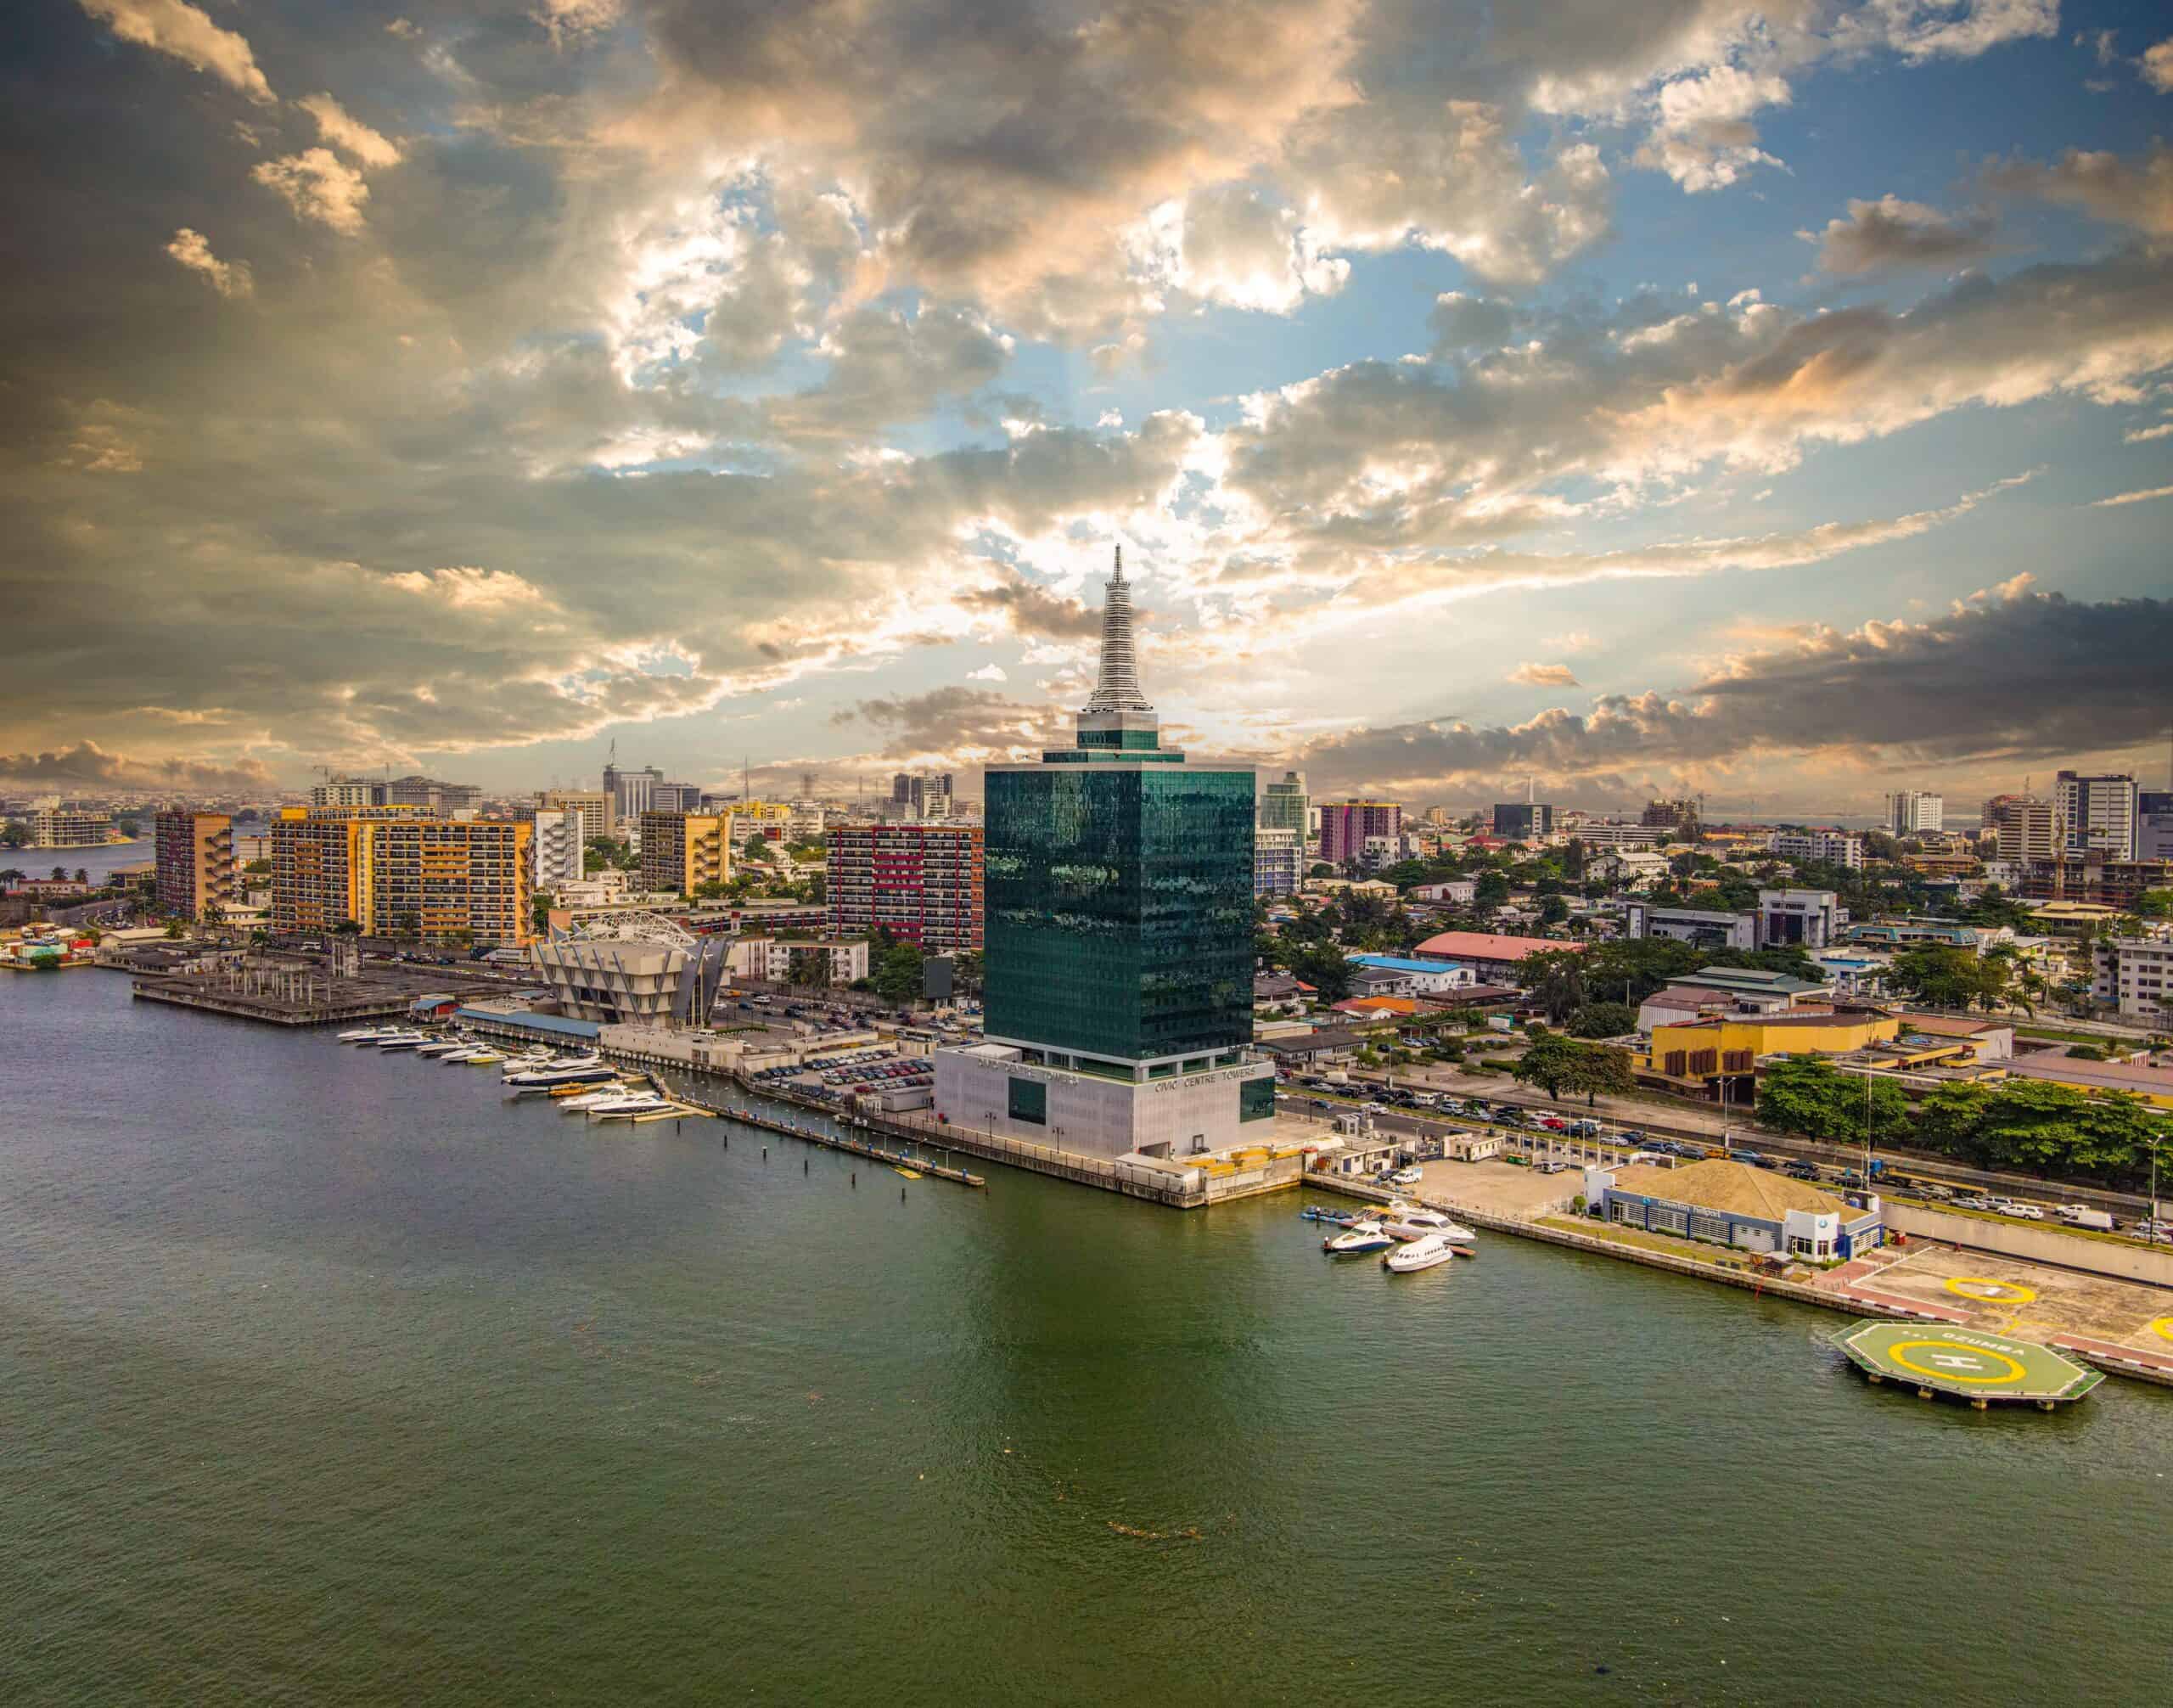 Nigeria | An aerial image of the shores of Victoria Island, Lagos